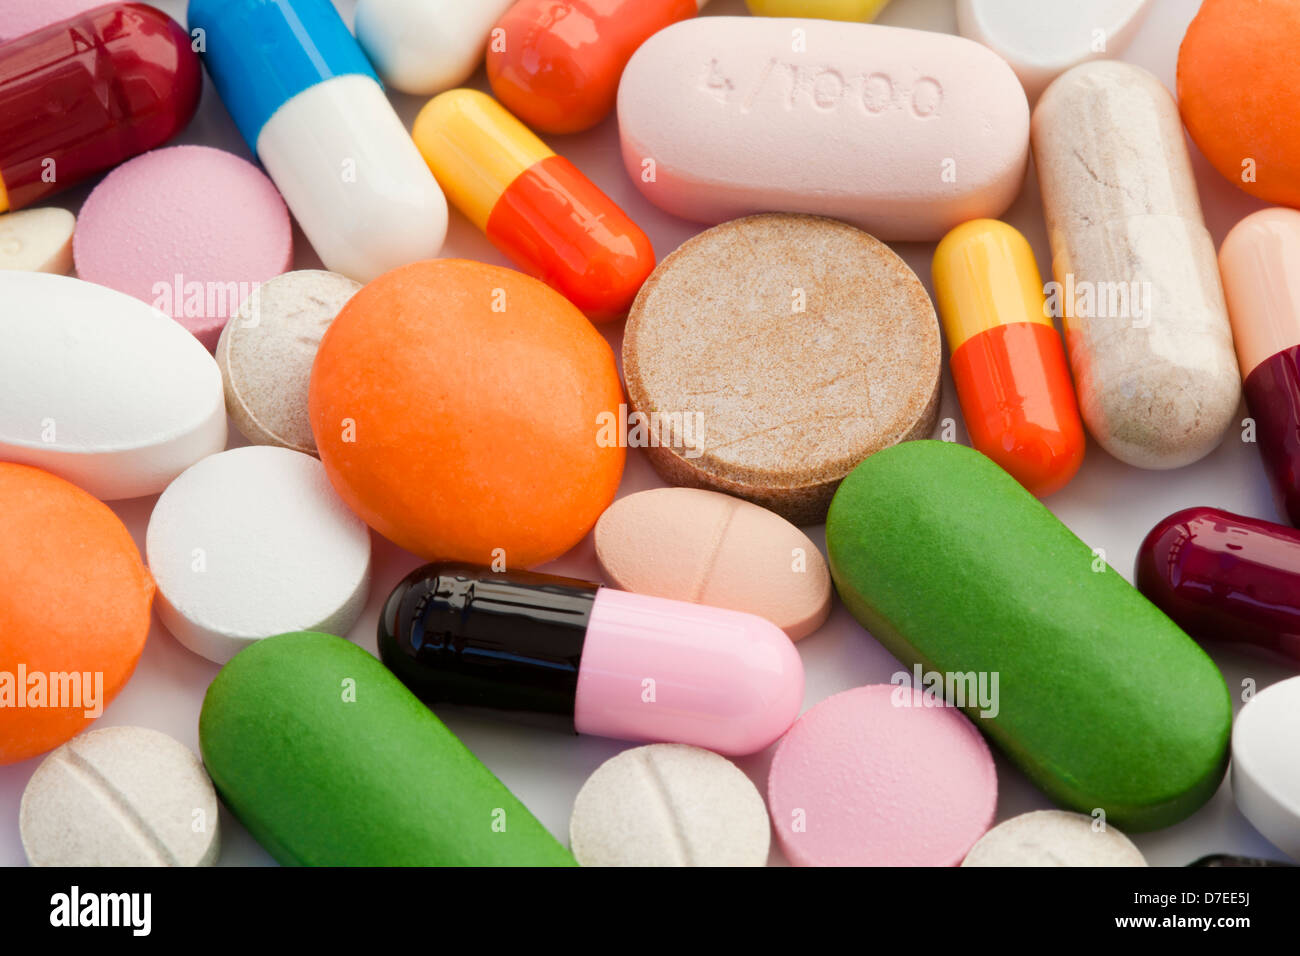 lots of colorful tablets and pills Stock Photo